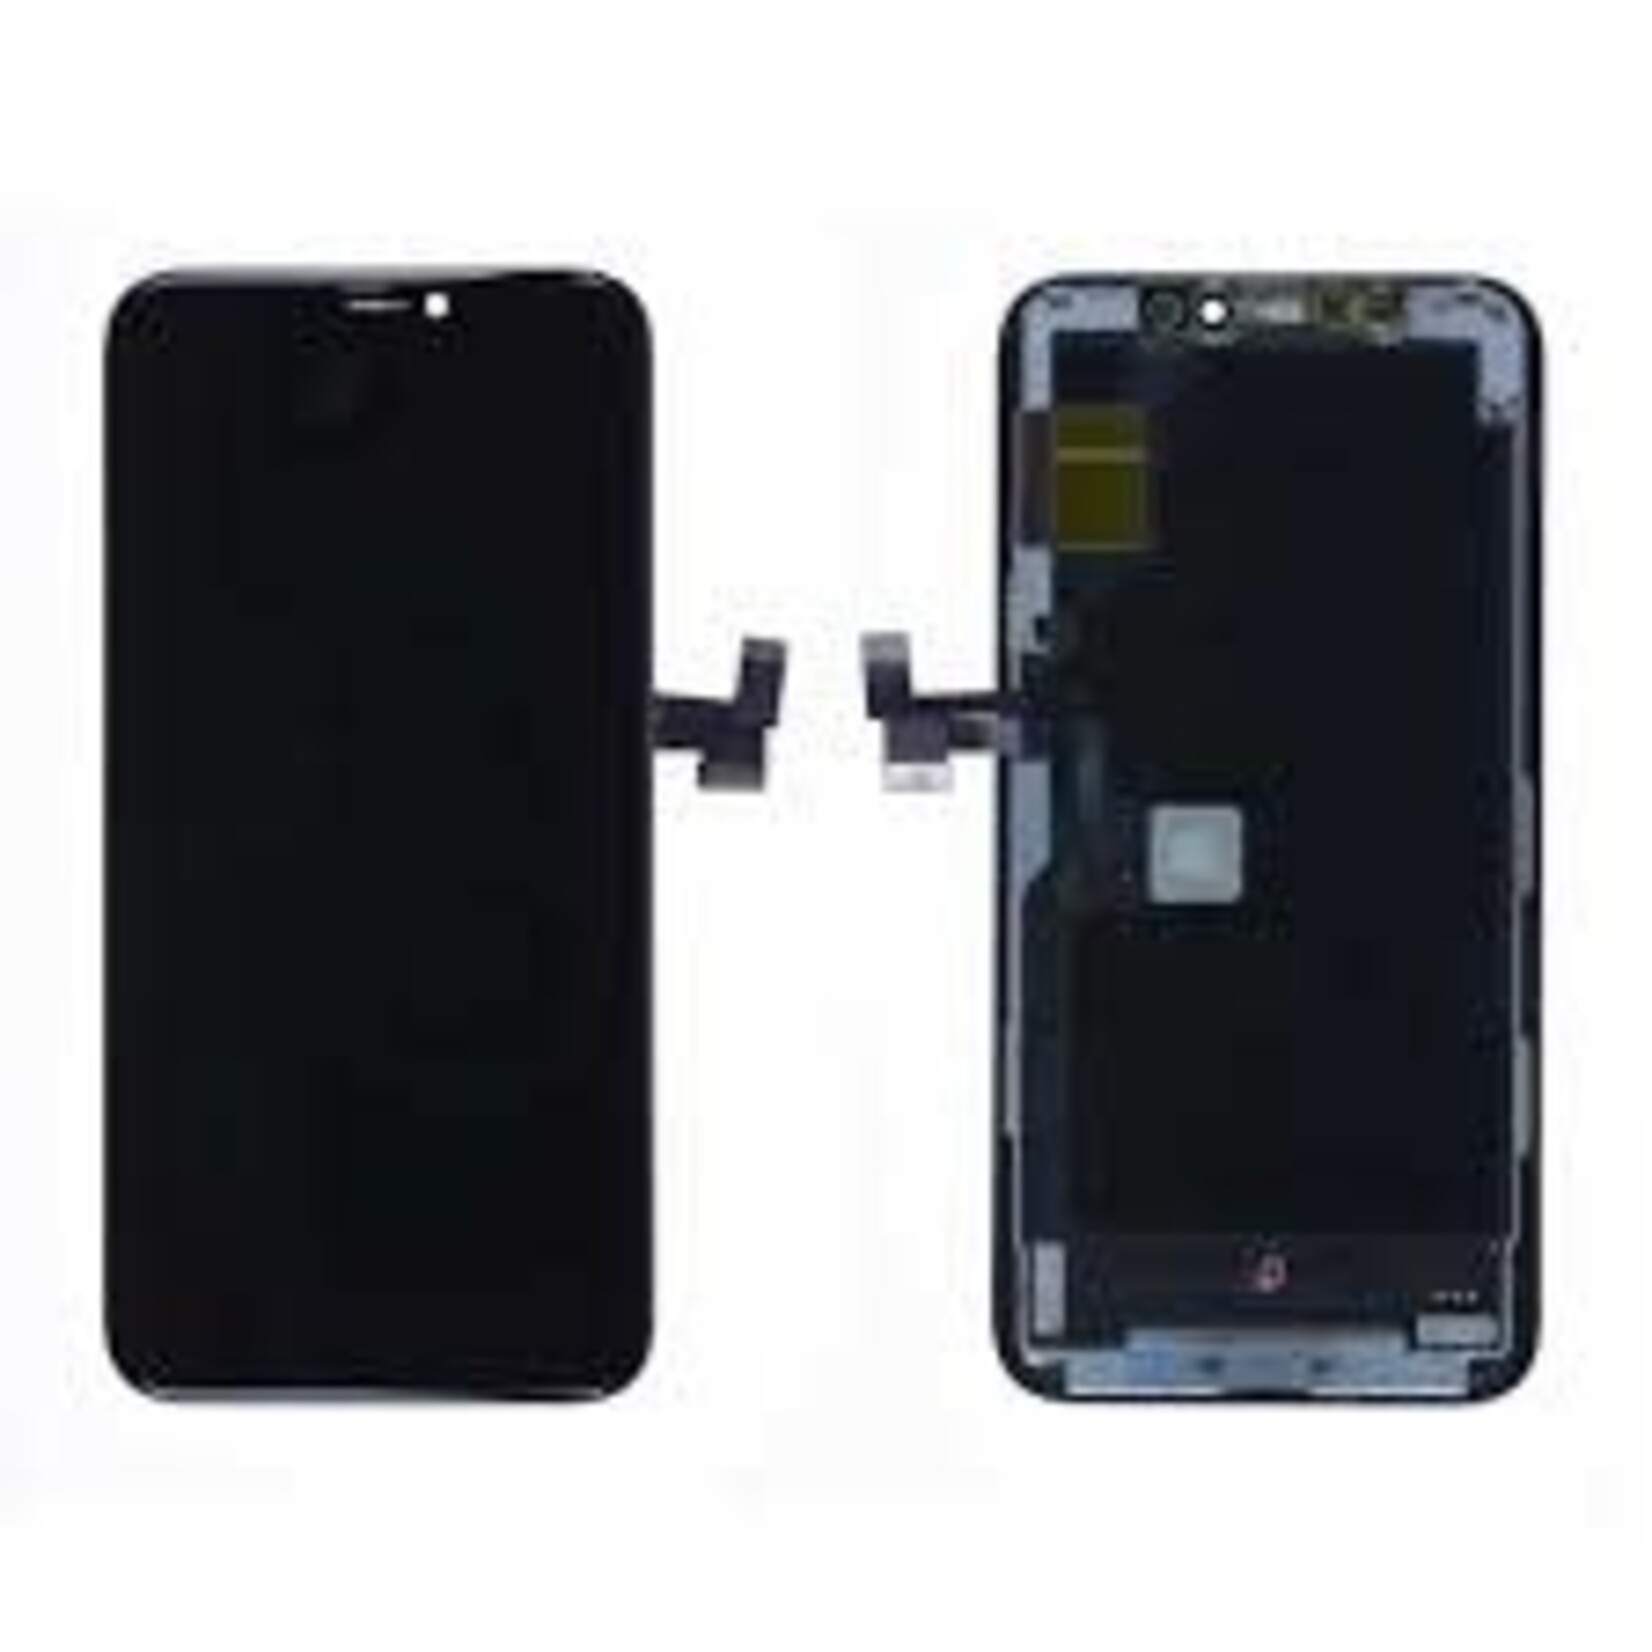 Apple LCD DIGITIZER ASSEMBLY IPHONE 11 PRO (oem)